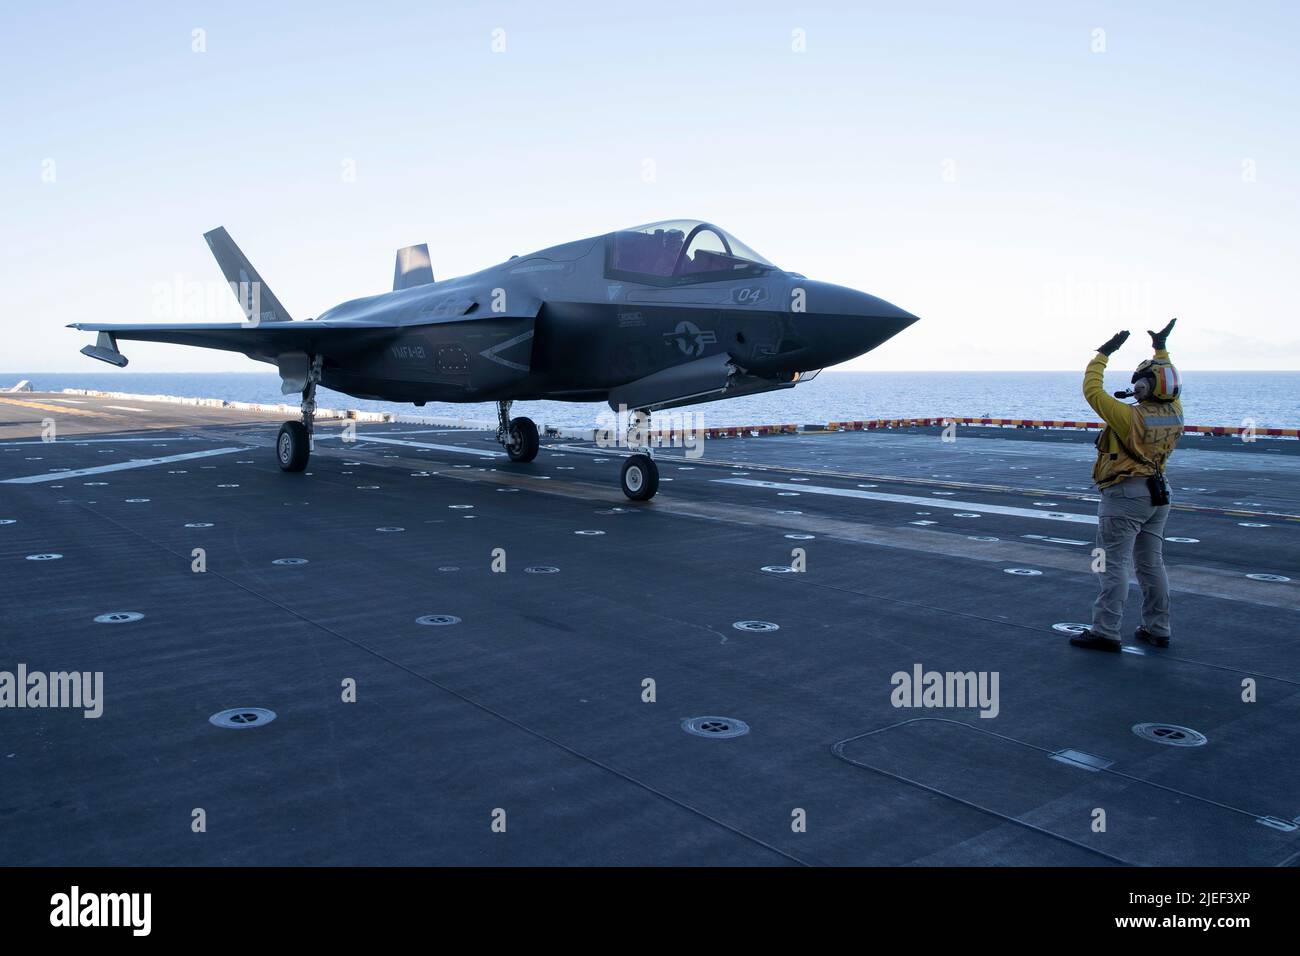 220624-N-XN177-2004 PACIFIC OCEAN  (June 24, 2022) – An F-35B Lightning II aircraft assigned to Marine Strike Fighter Squadron (VMFA) 121 taxis on the flight deck of amphibious assault carrier USS Tripoli (LHA 7), June 24, 2022. Tripoli is operating in the U.S. 7th Fleet area of operations to enhance interoperability with allies and partners and serve as a ready response force to defend peace and maintain stability in the Indo-Pacific region.  (U.S. Navy photo by Mass Communication Specialist 1st Class Peter Burghart) Stock Photo